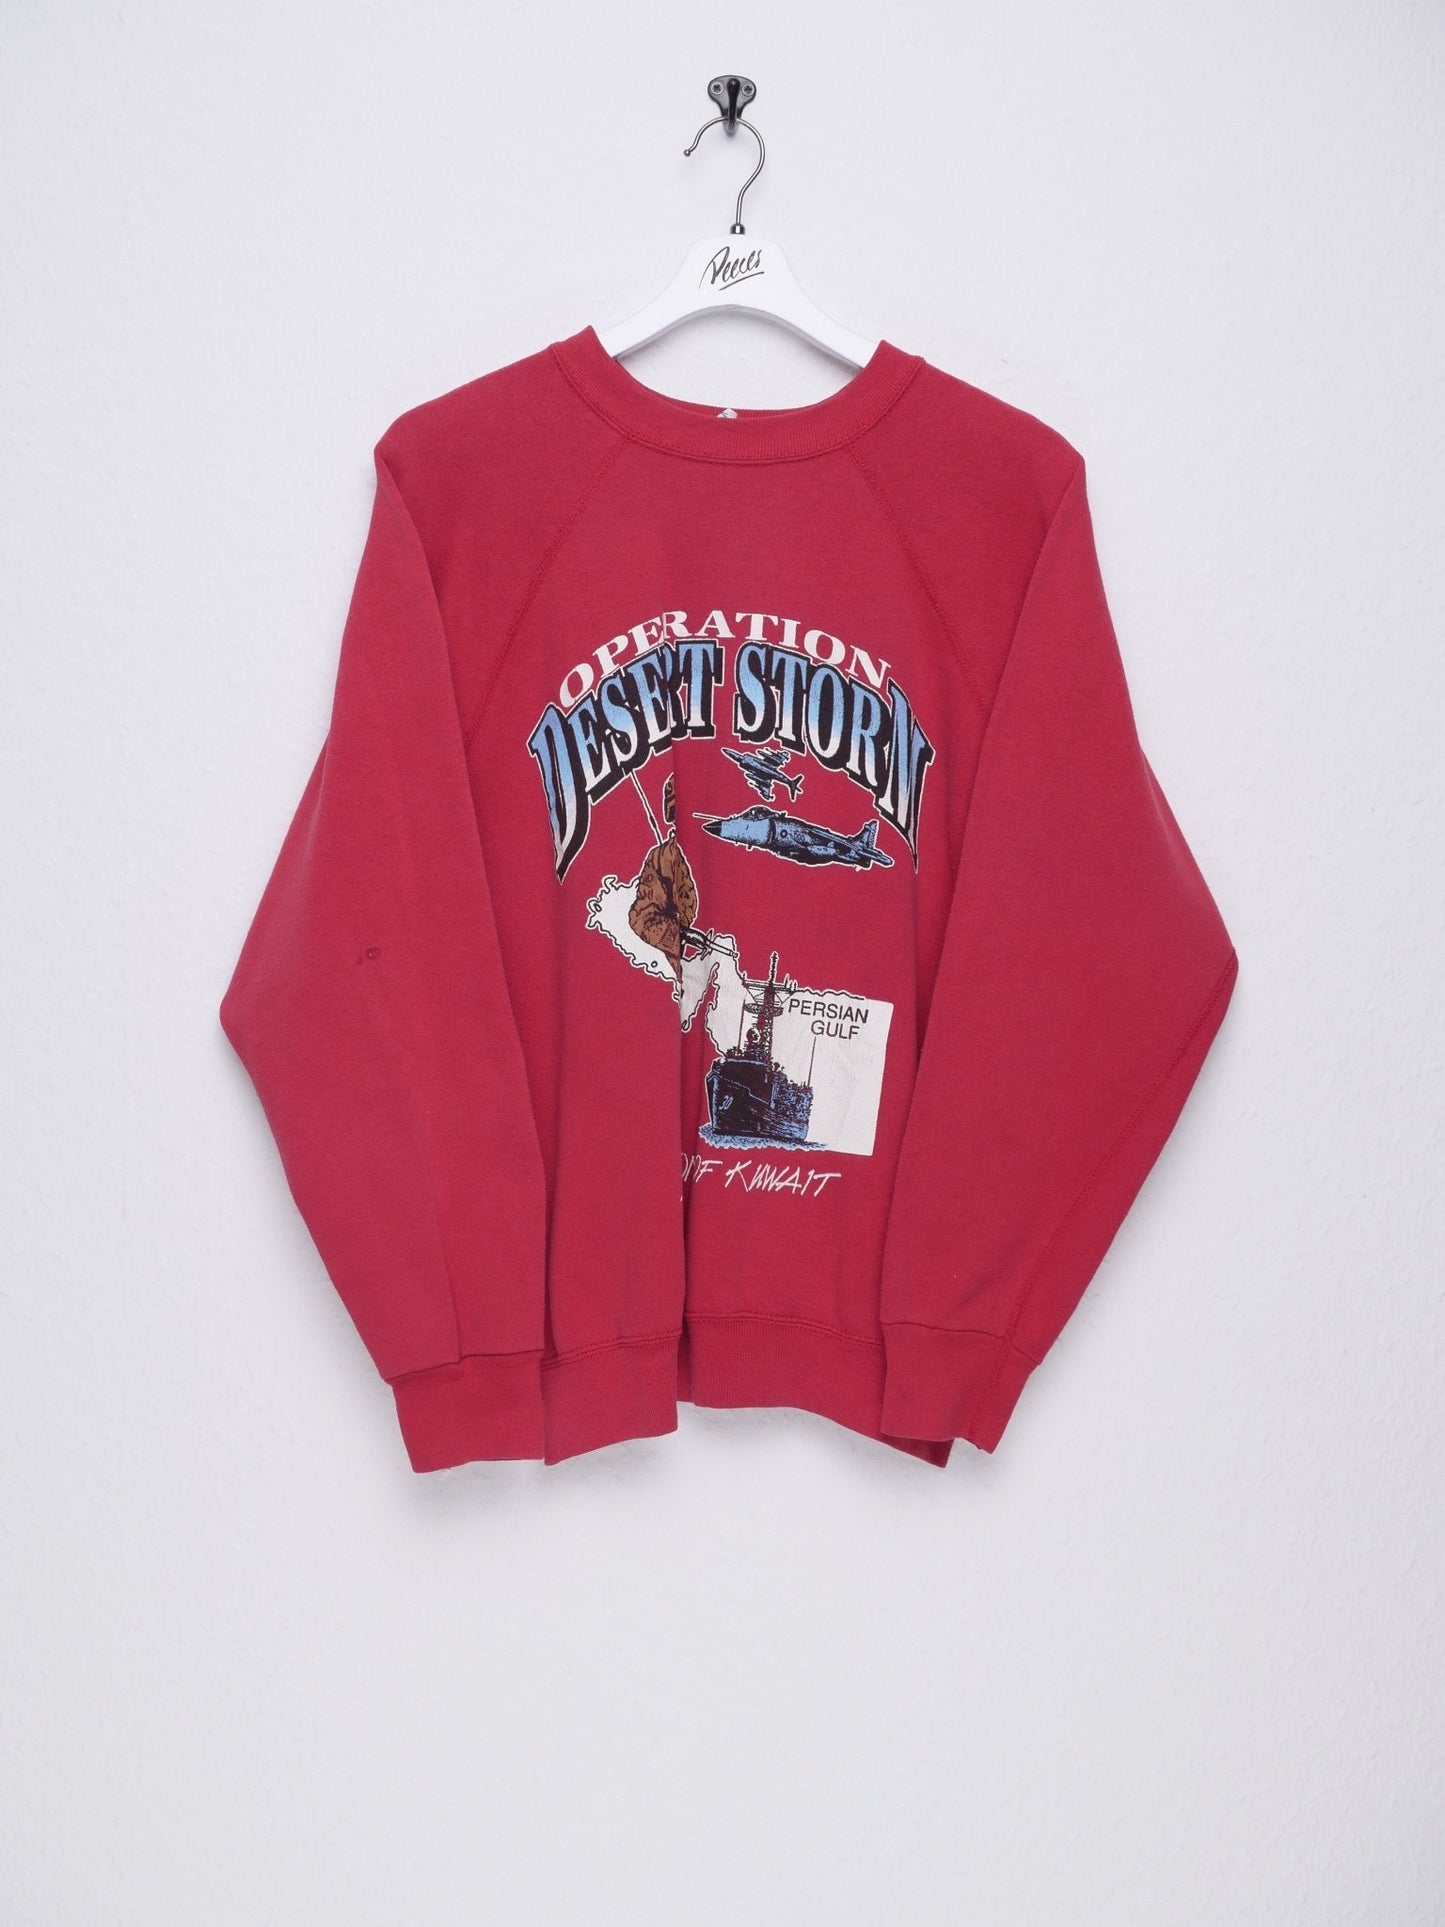 printed 'Liberation of Kuwait 1991' red Sweater - Peeces